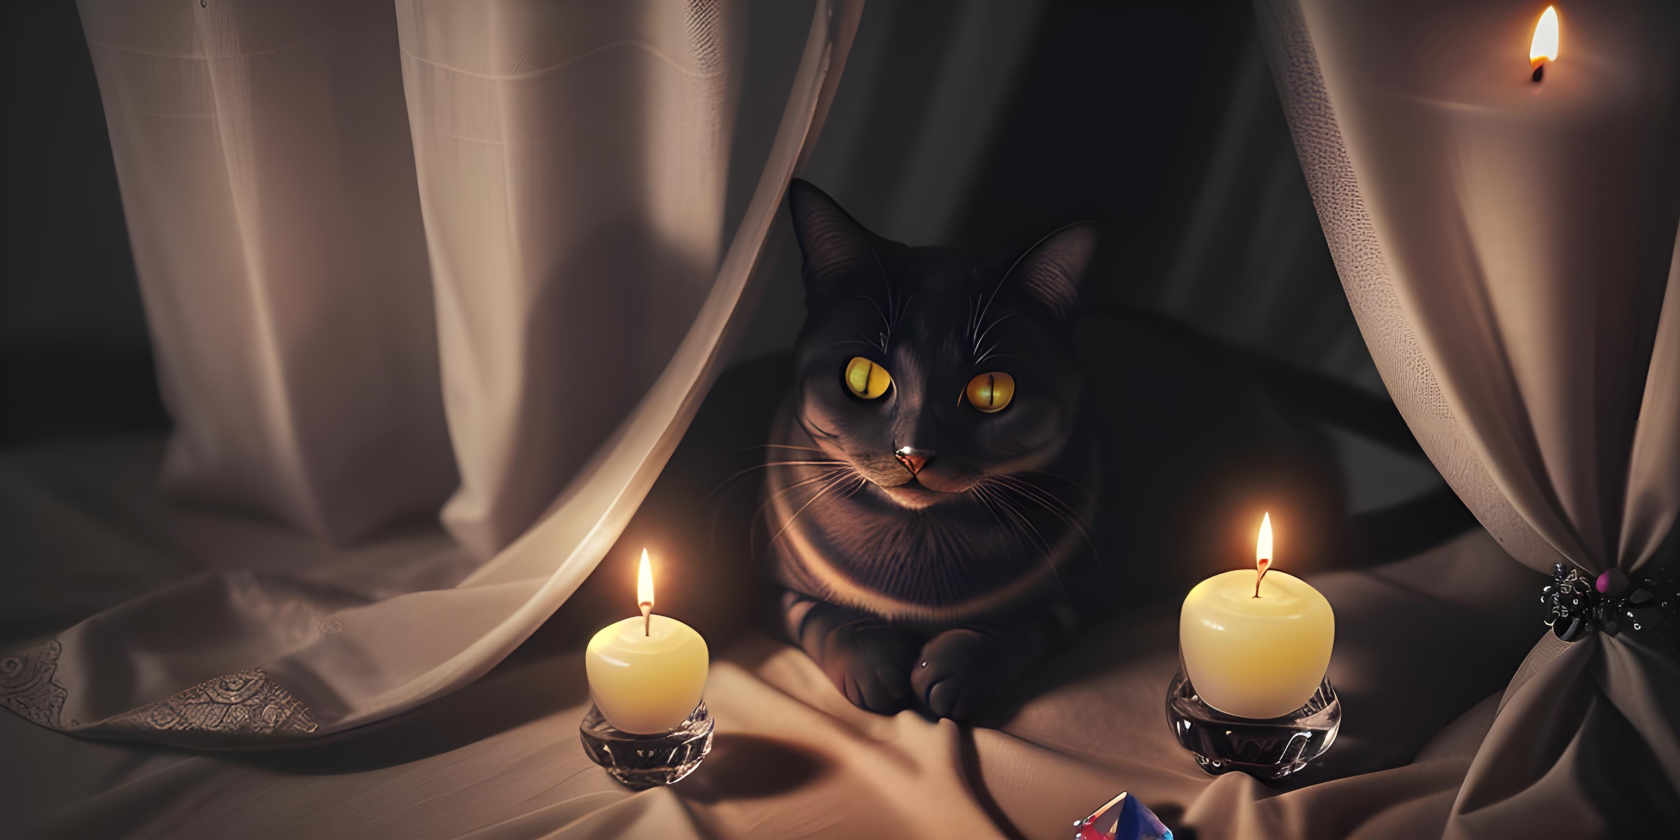 An artistic rendition of a cat sitting among curtains and illuminated by three candles